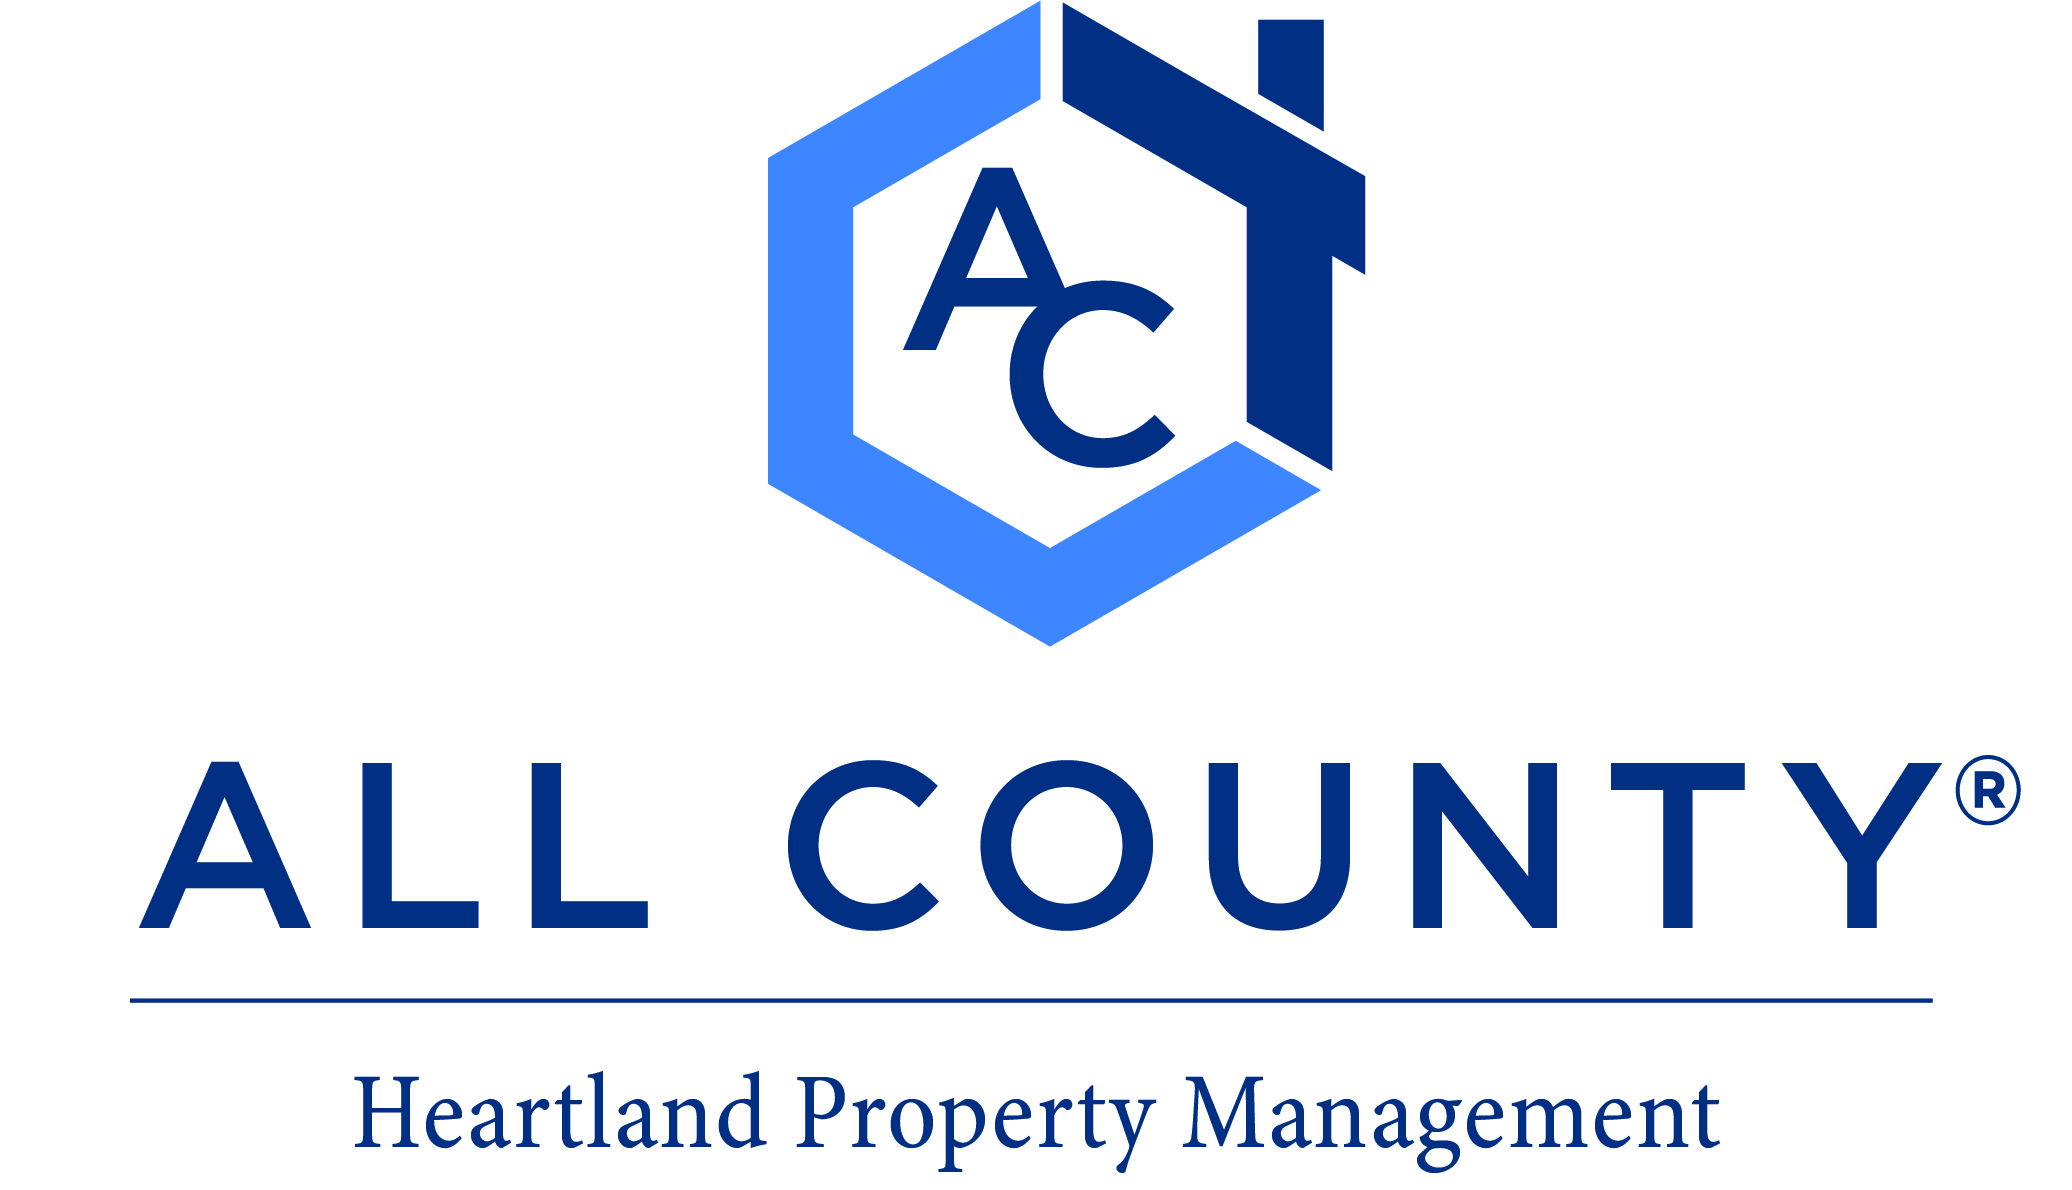 All County Heartland Property Management logo